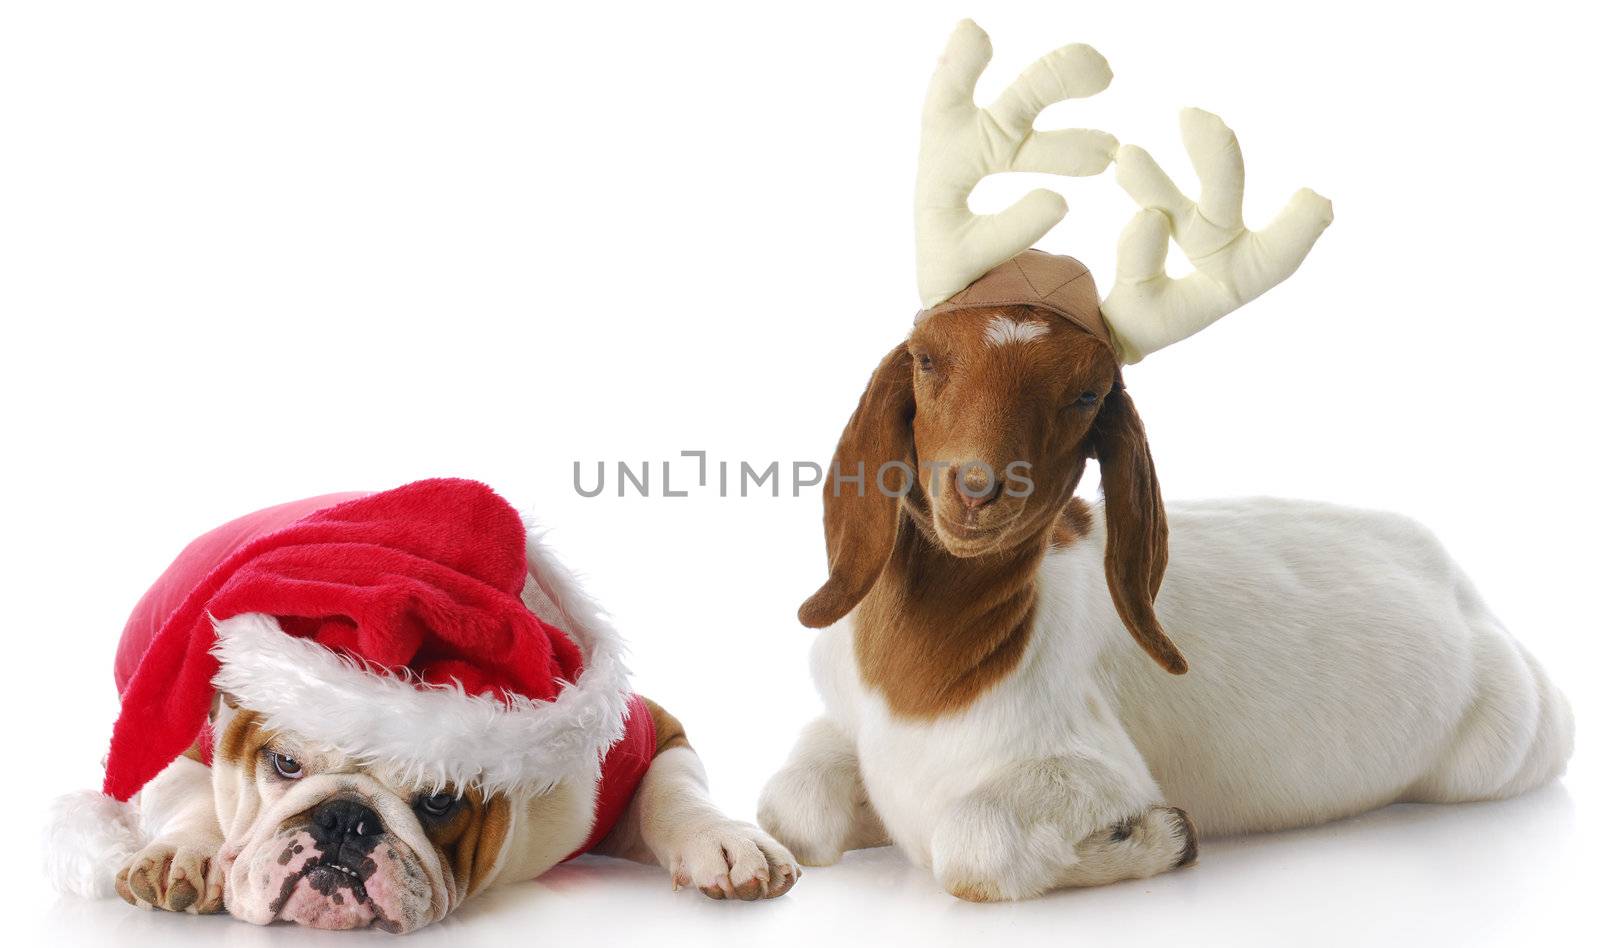 dog dressed up as santa and goat dressed up as rudolph with reflection on white background